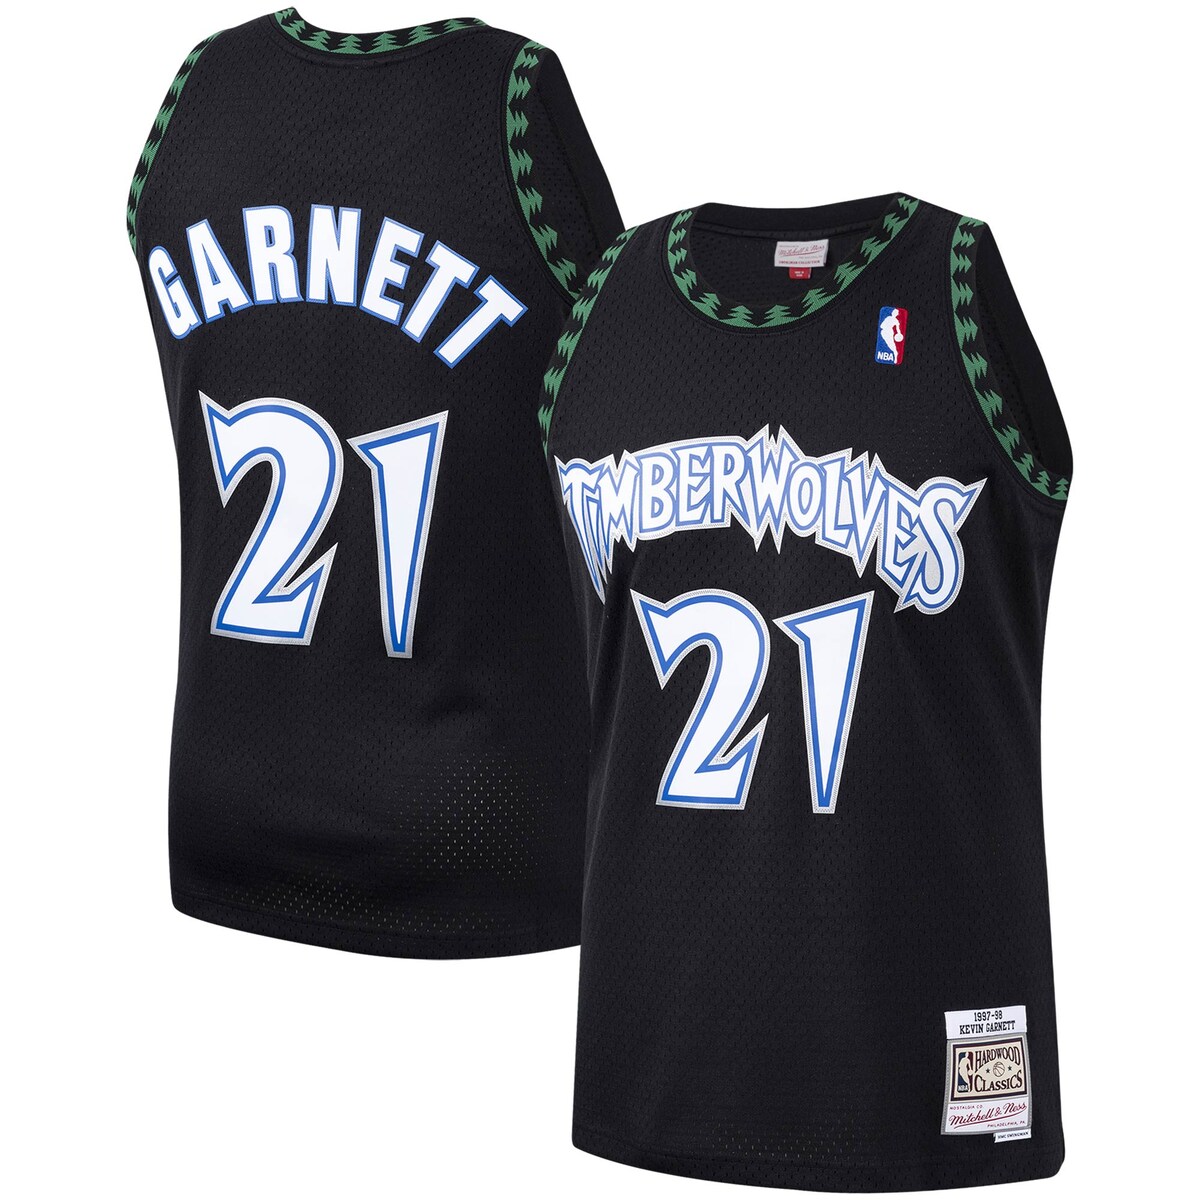 Rep one of your all-time favorite pros with this Kevin Garnett Swingman jersey from Mitchell & Ness. The throwback Minnesota Timberwolves details are inspired by the franchise's iconic look of days gone by. Every stitch on this jersey is tailored to exact team specifications, delivering outstanding quality and a premium feel.ImportedOfficially licensedSwingman ThrowbackCrew neckMaterial: 100% PolyesterHeat-sealed NBA logoSide splits at waist hemWoven jock tagRib-knit collar and arm openingsBrand: Mitchell & NessWoven tag with player detailsSleevelessTackle twill graphicsMachine wash, line dryMesh fabric